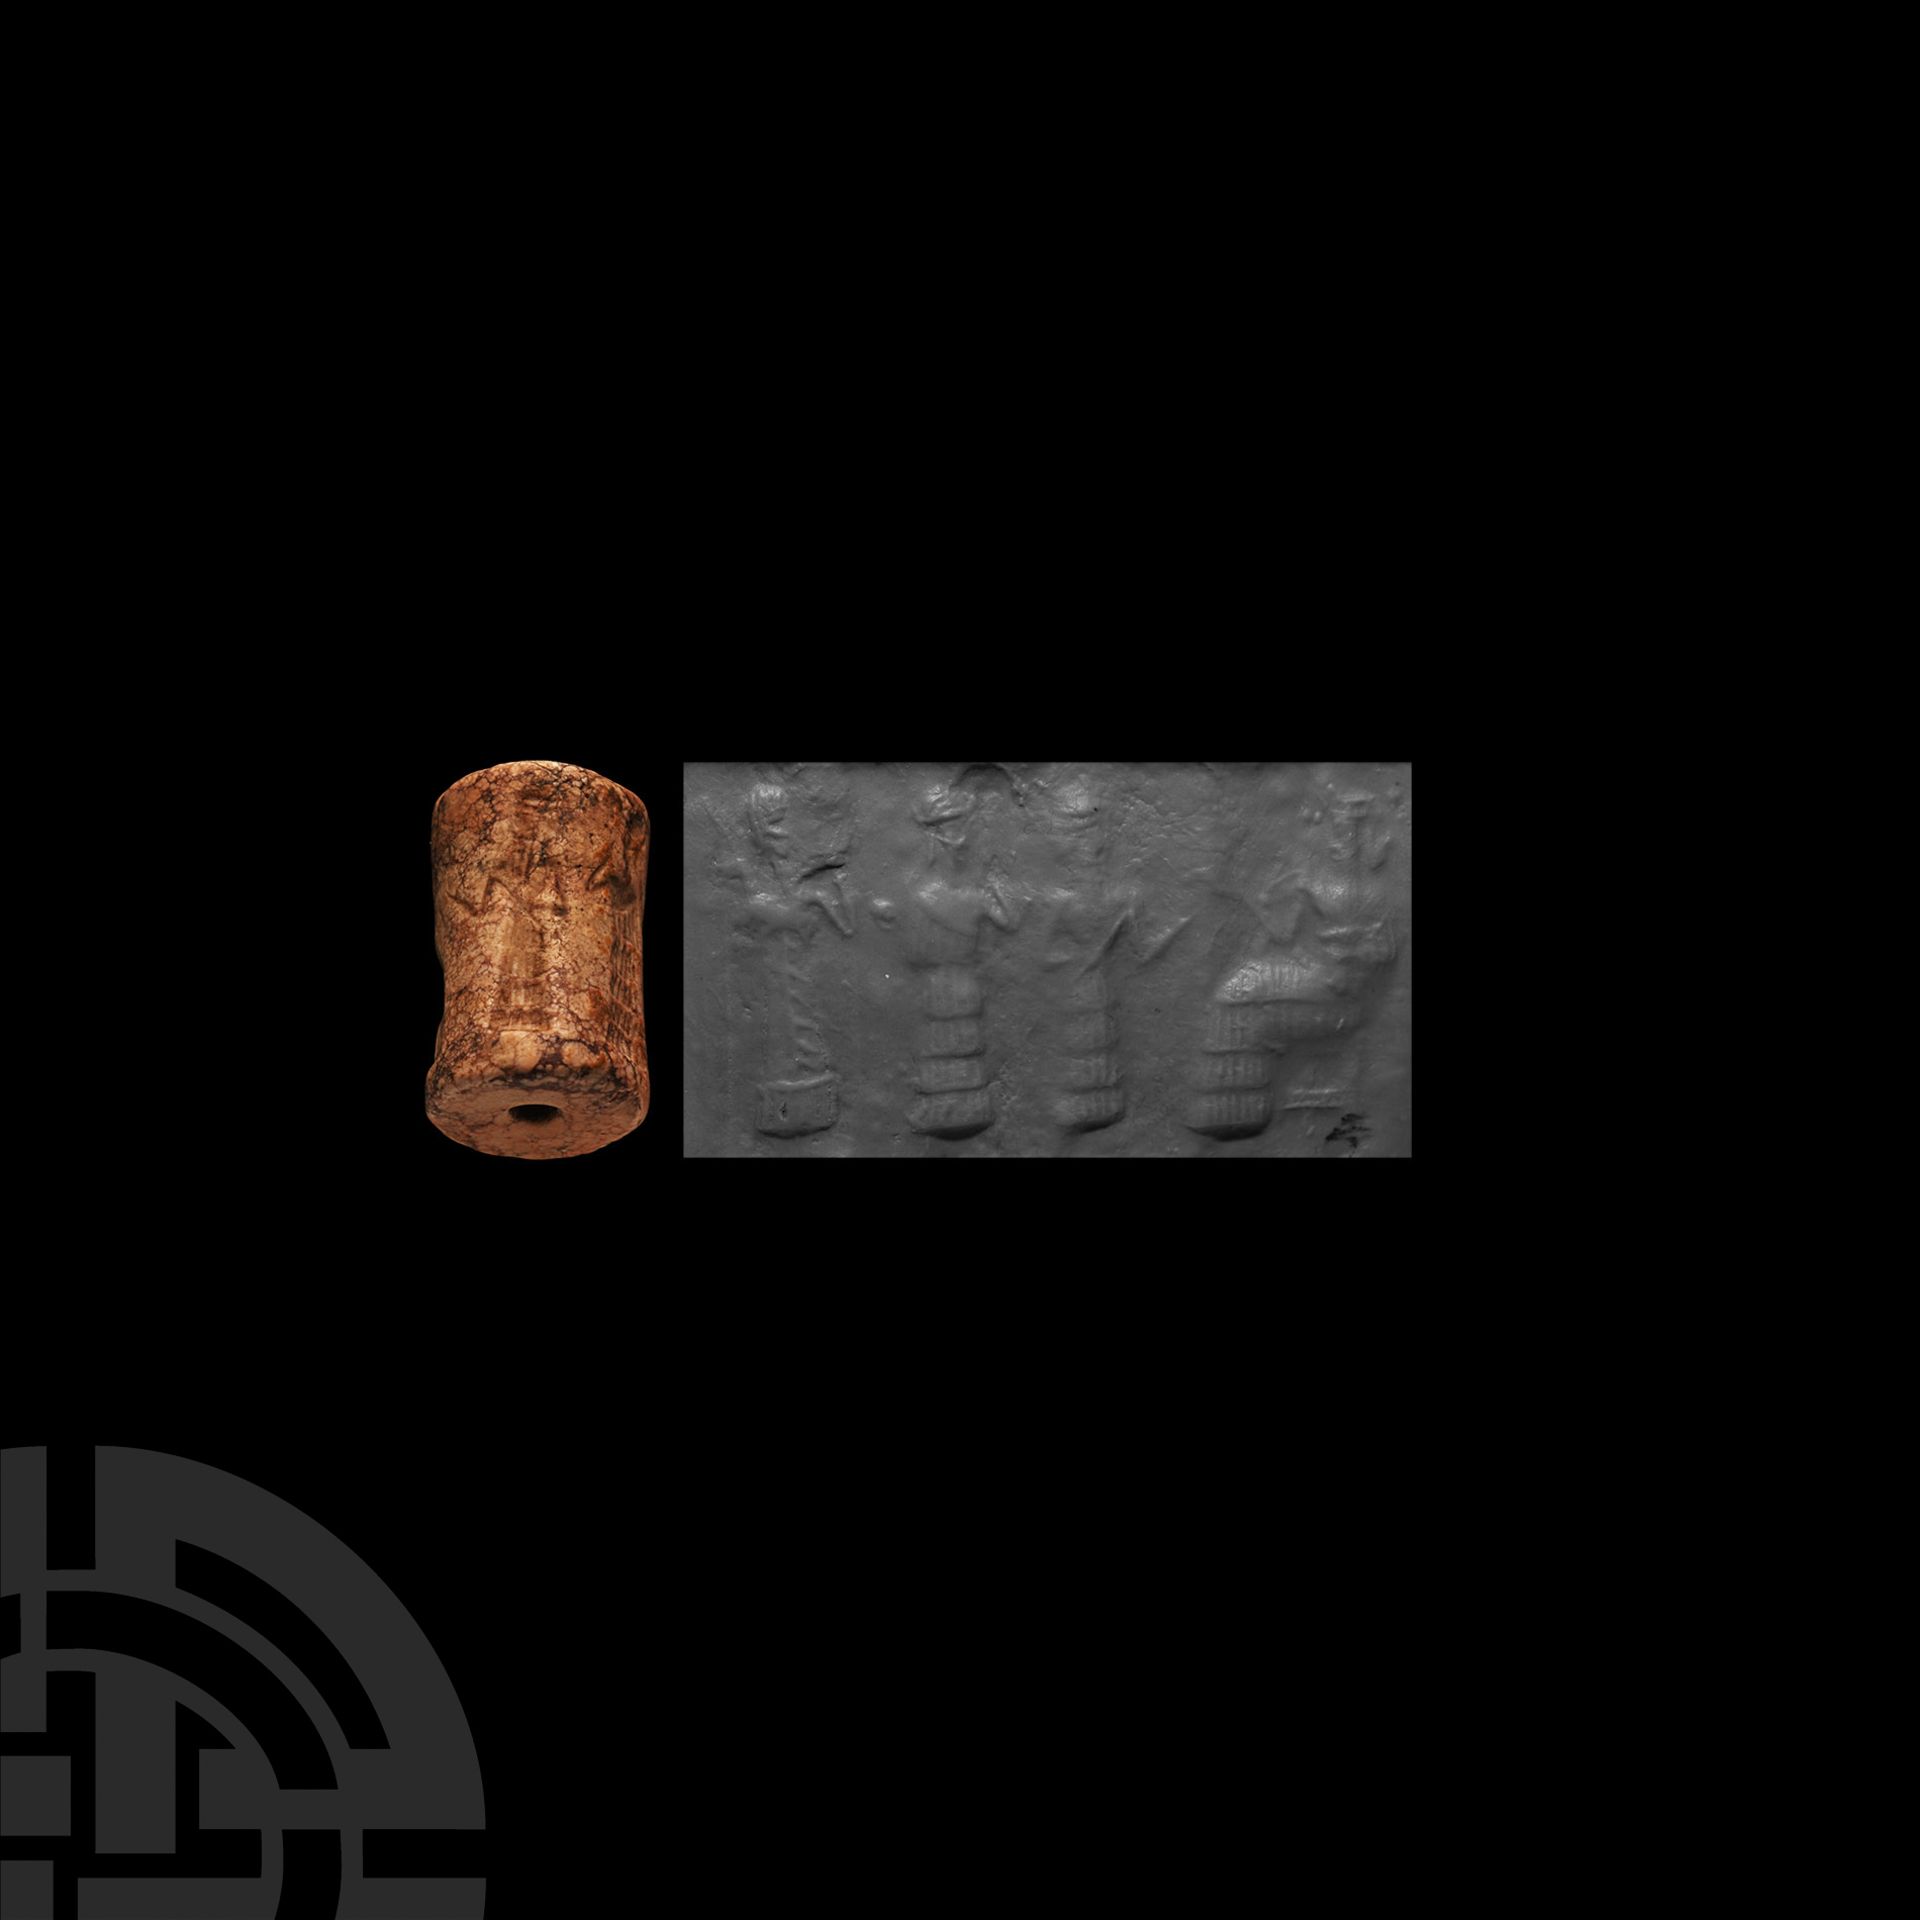 Western Asiatic Marble Cylinder Seal with Worship Scene